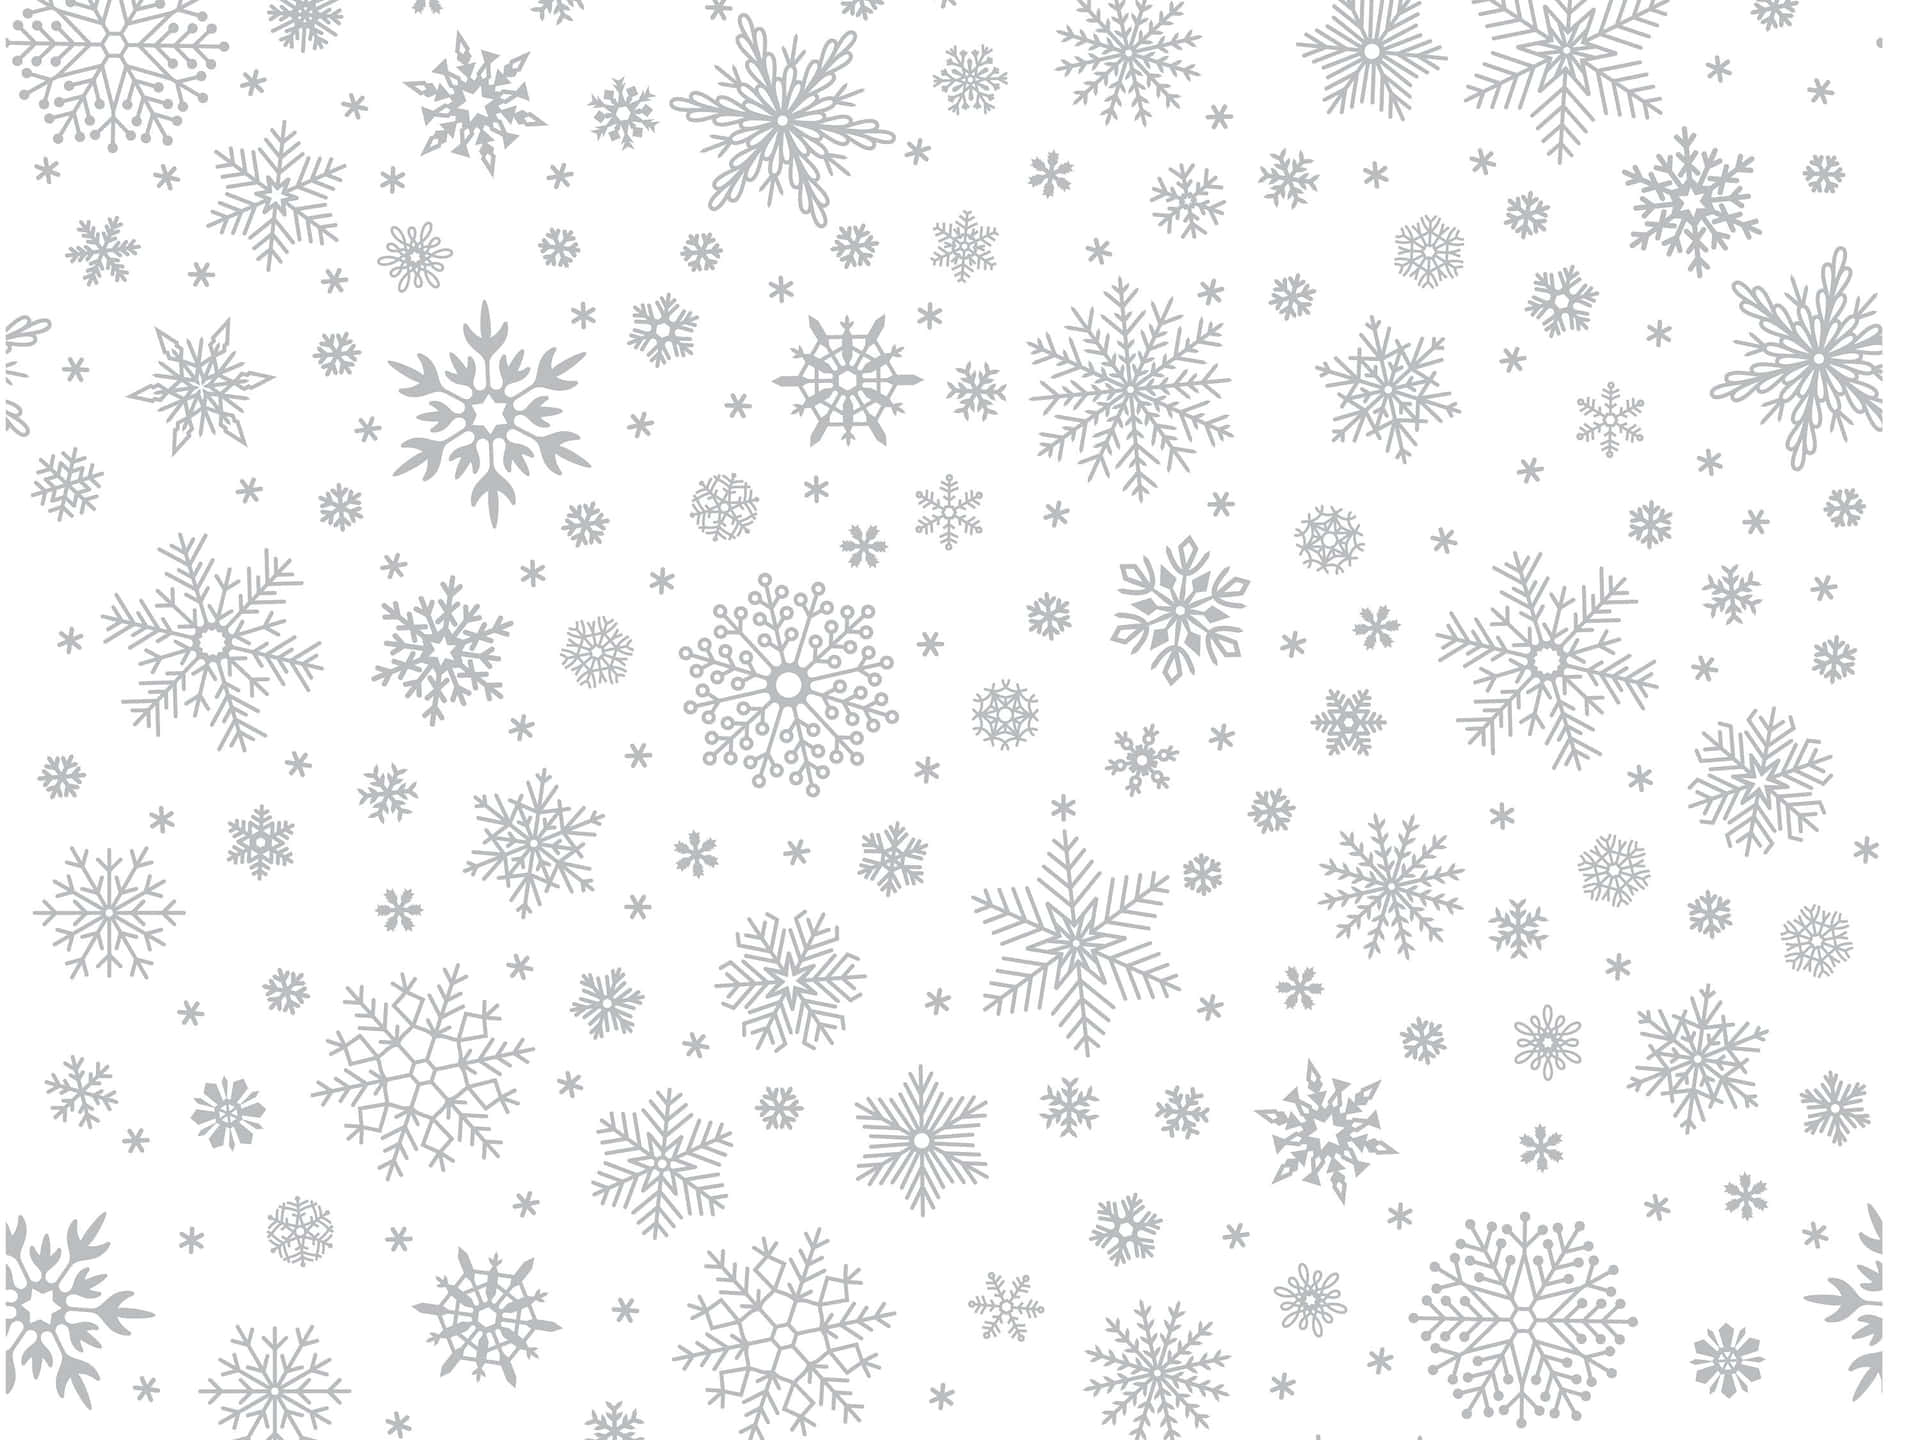 Download Gray Snowflakes Background In Pattern Design | Wallpapers.com